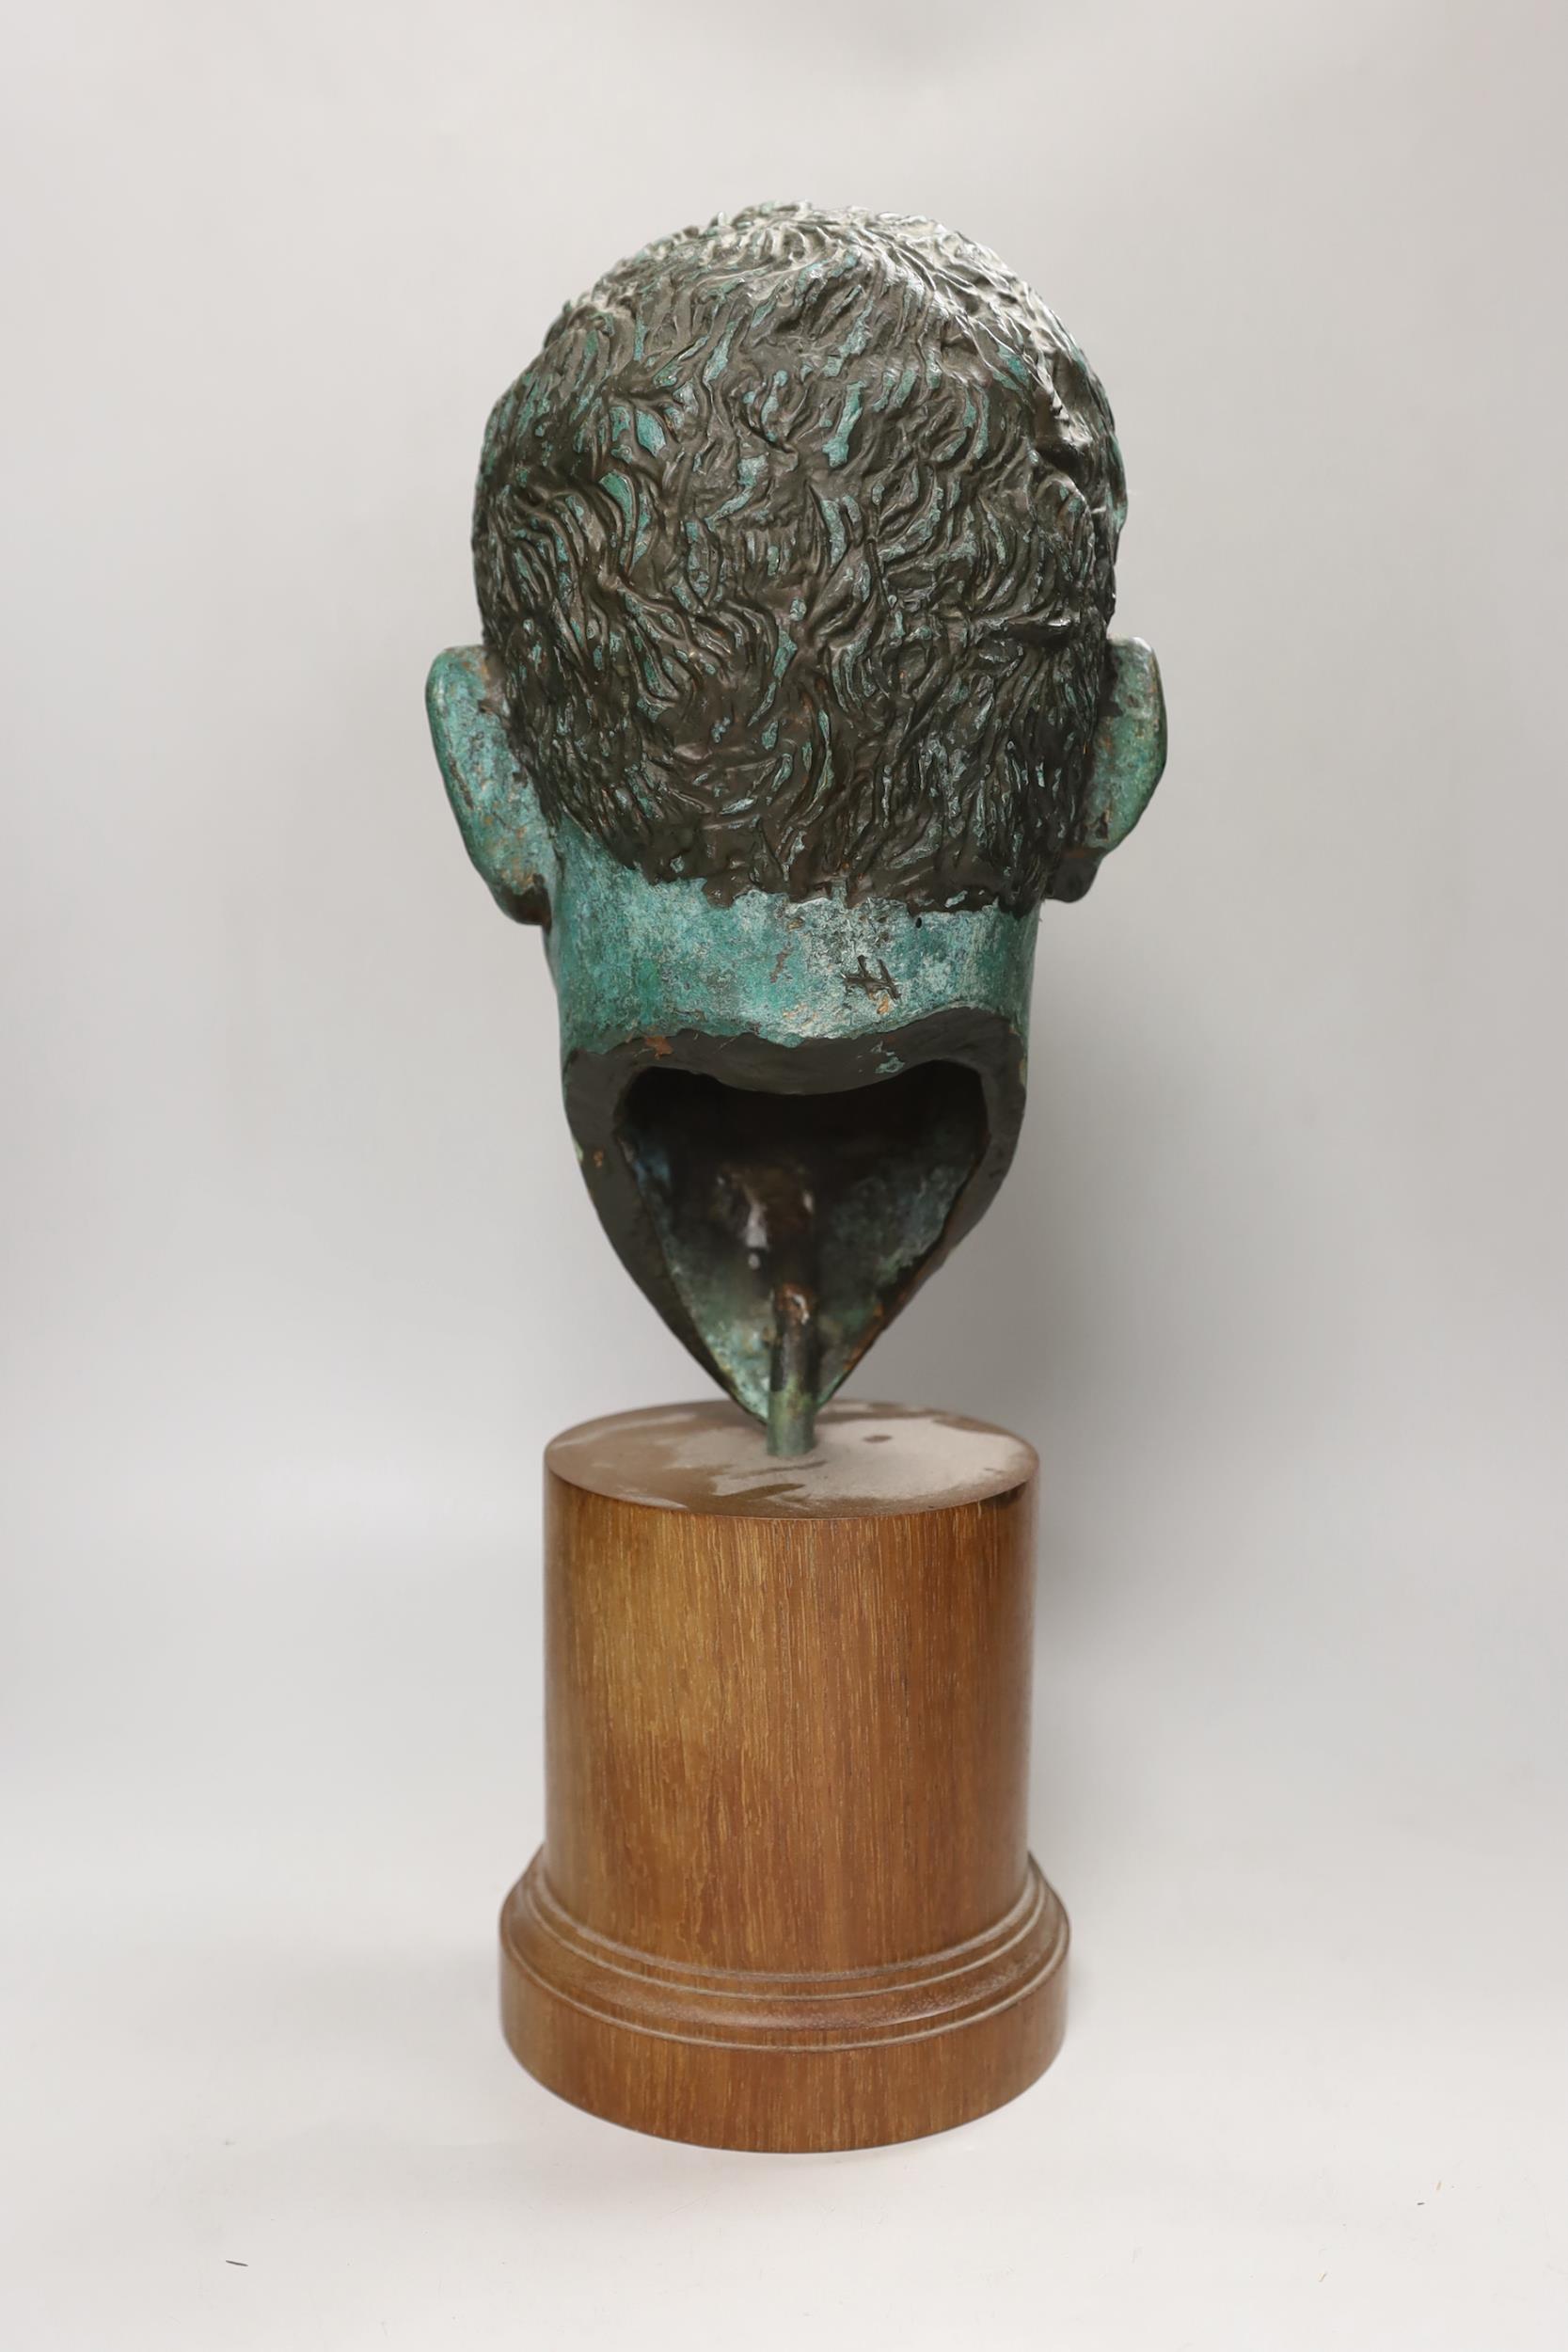 A verdigris metal head of a gentleman mounted on a wooden stand, 48cm high - Image 3 of 3